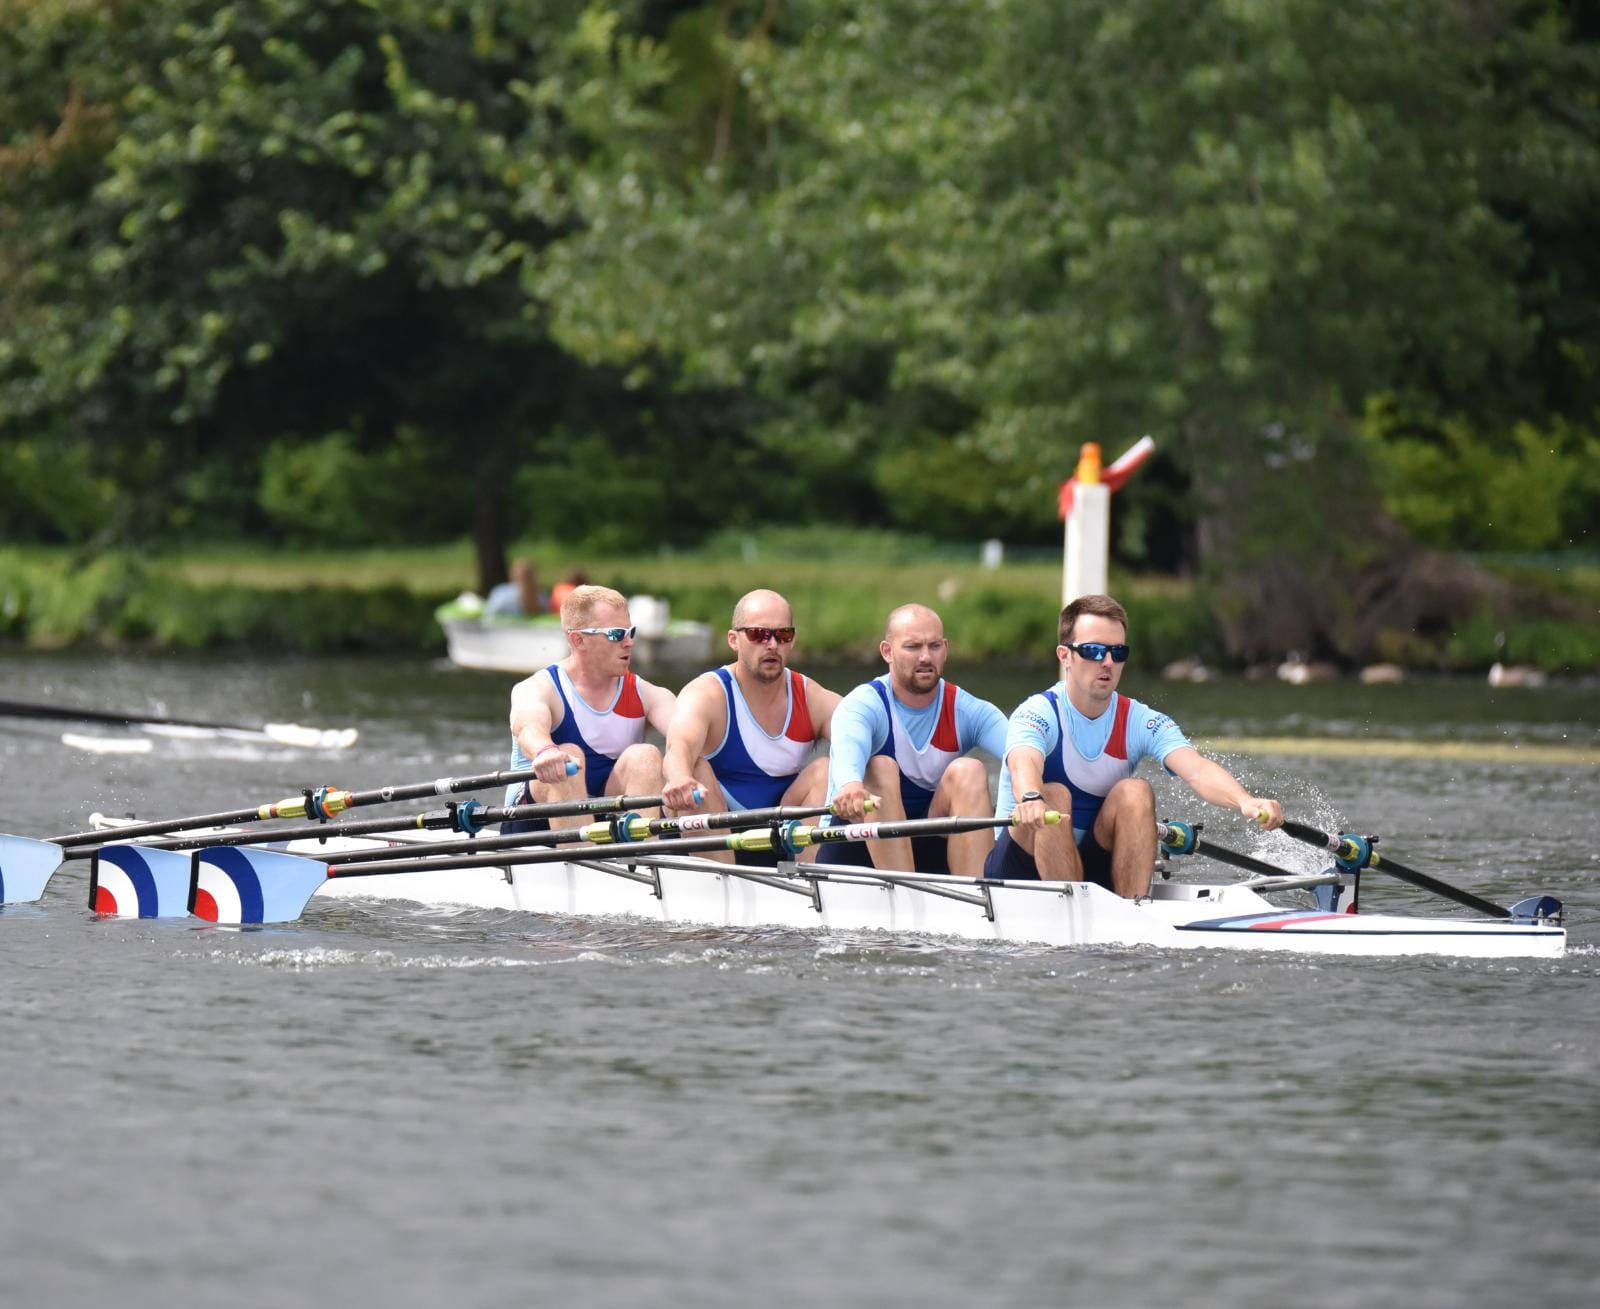 Personnel rowing for the RAF on a river. 